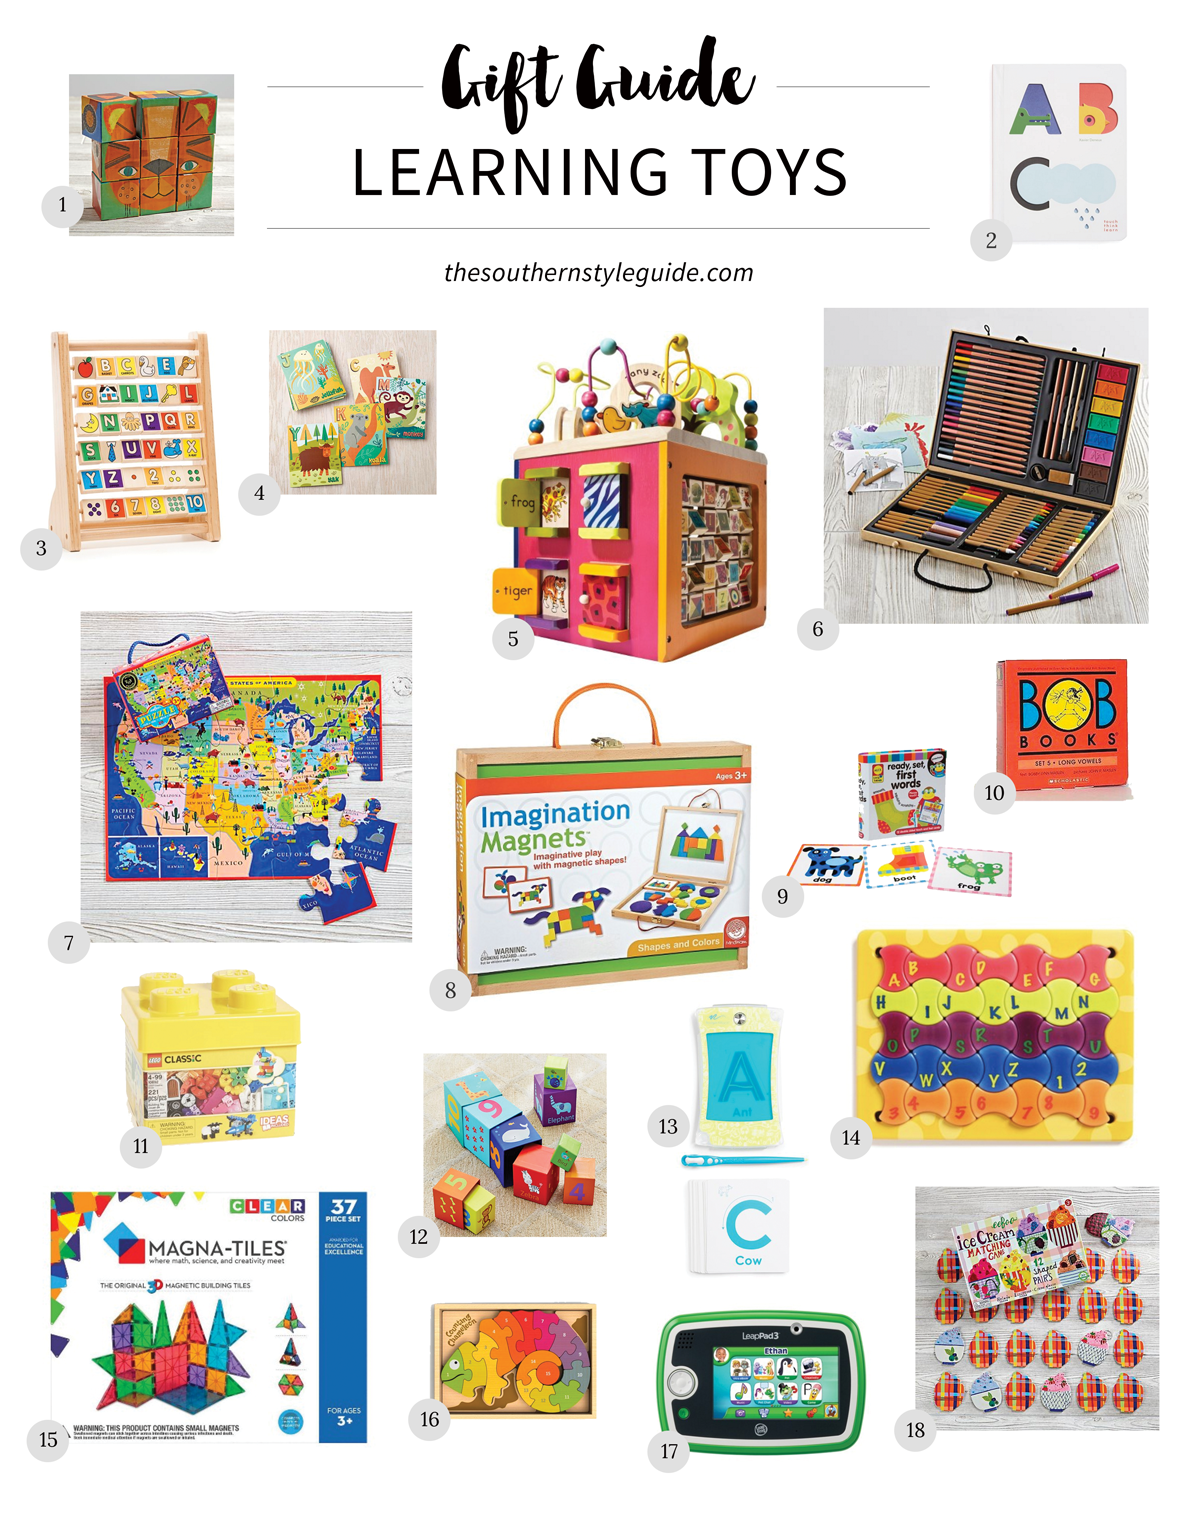 educational gifts for kids